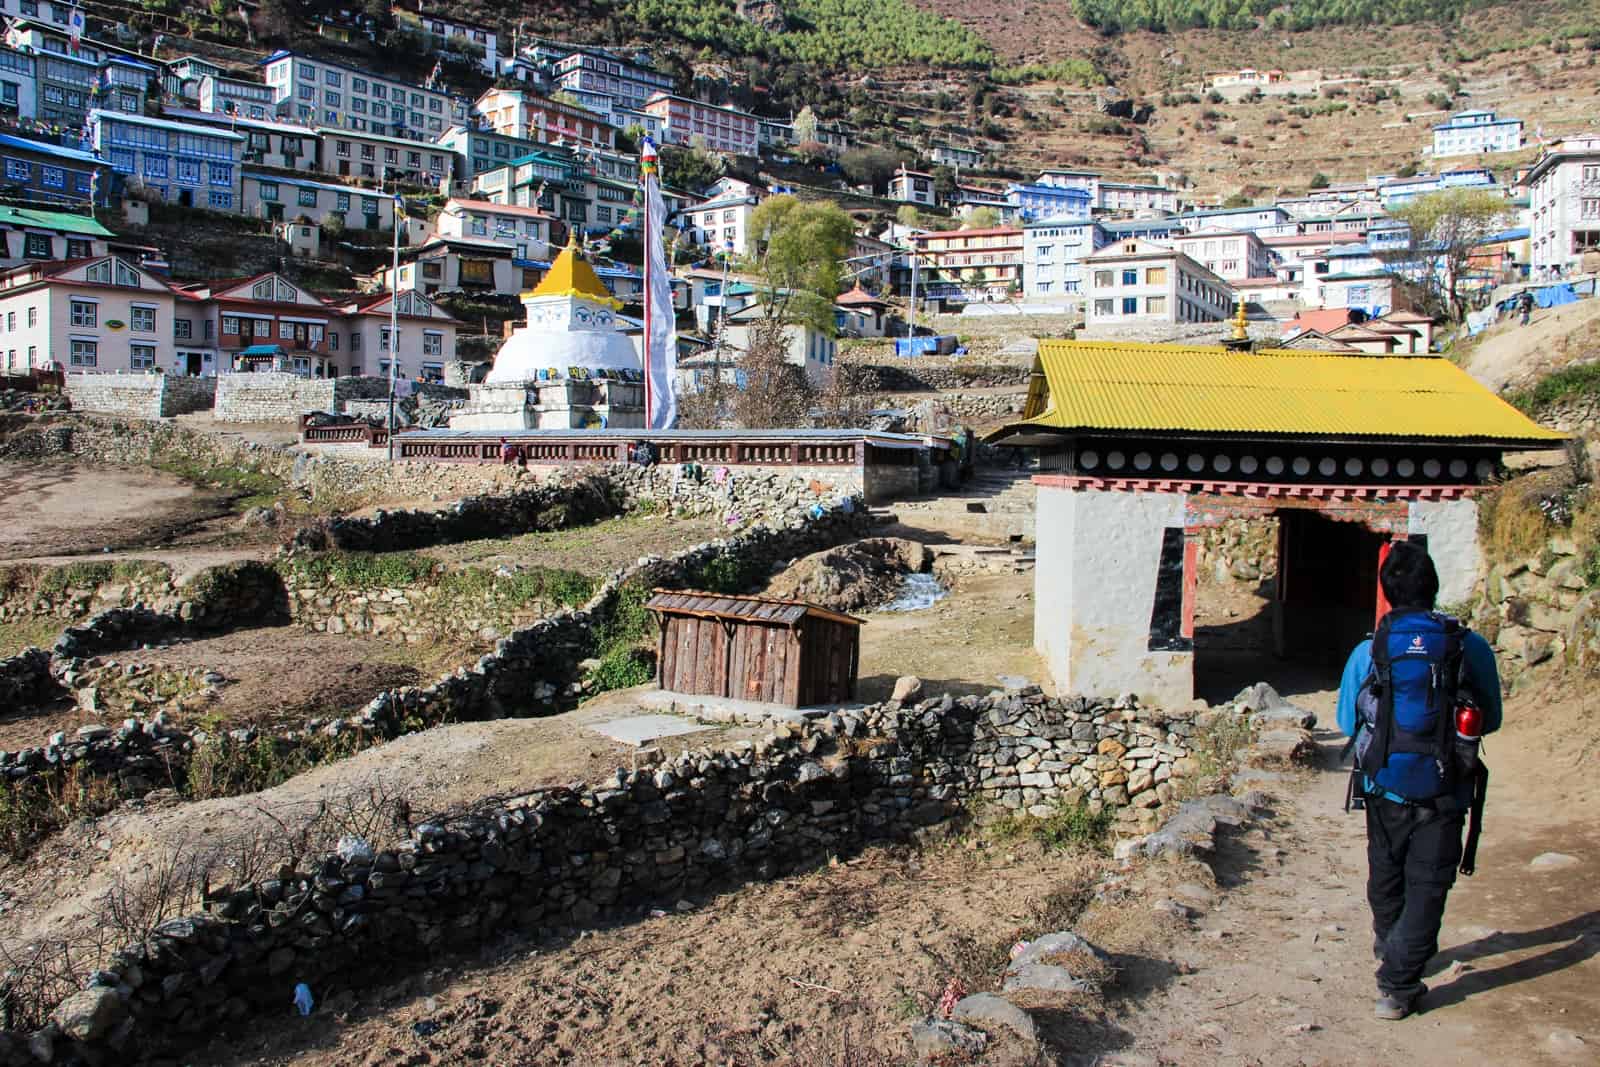 A man with a blue backpack walked towards a white gate with a yellow roof - the entrance to the Namche Bazaar village on the EBC Trek - towards a small white and gold temple structure and a cluster of and a cluster of rectangular houses built on the hillside